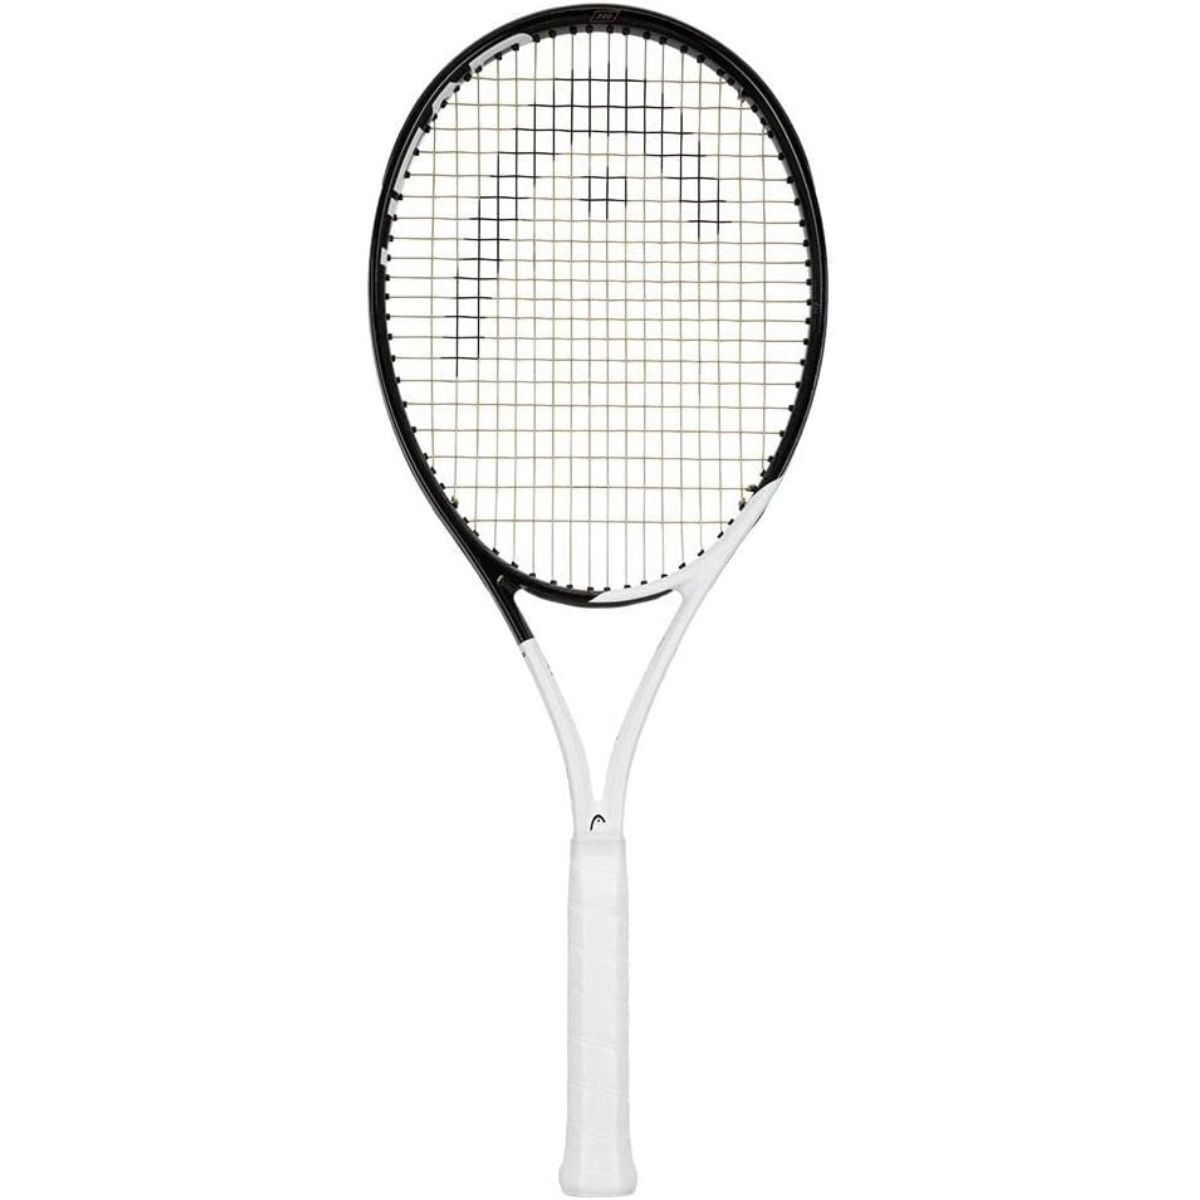 The Best Tennis Rackets for Advanced Players Options: Head Speed Pro 2022